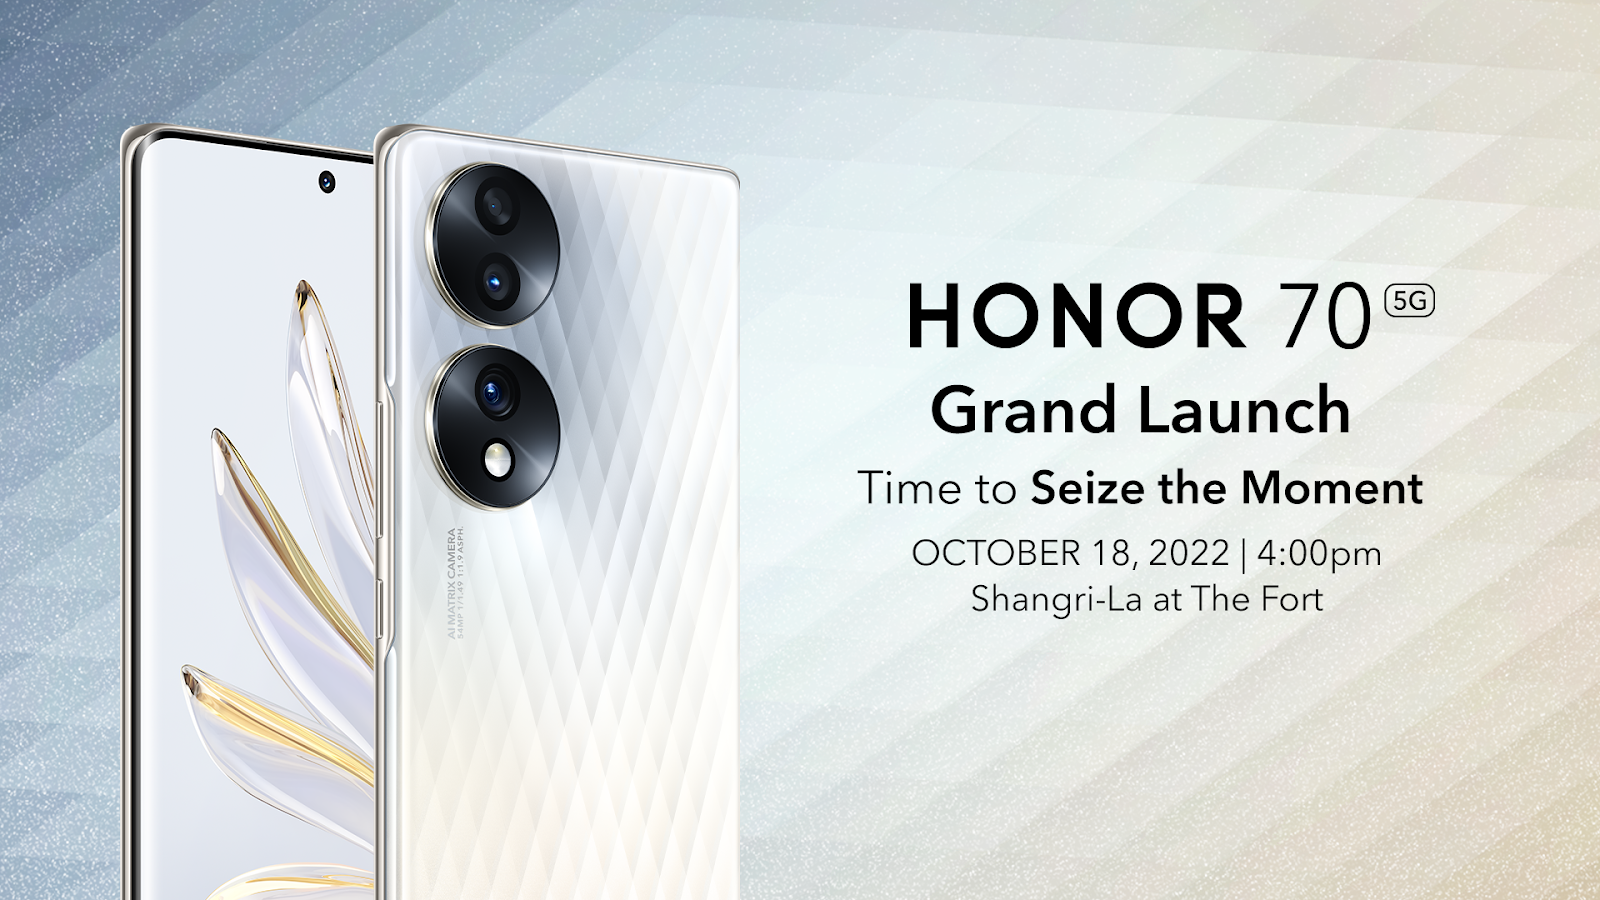 HONOR 70 5G Launches October 18th